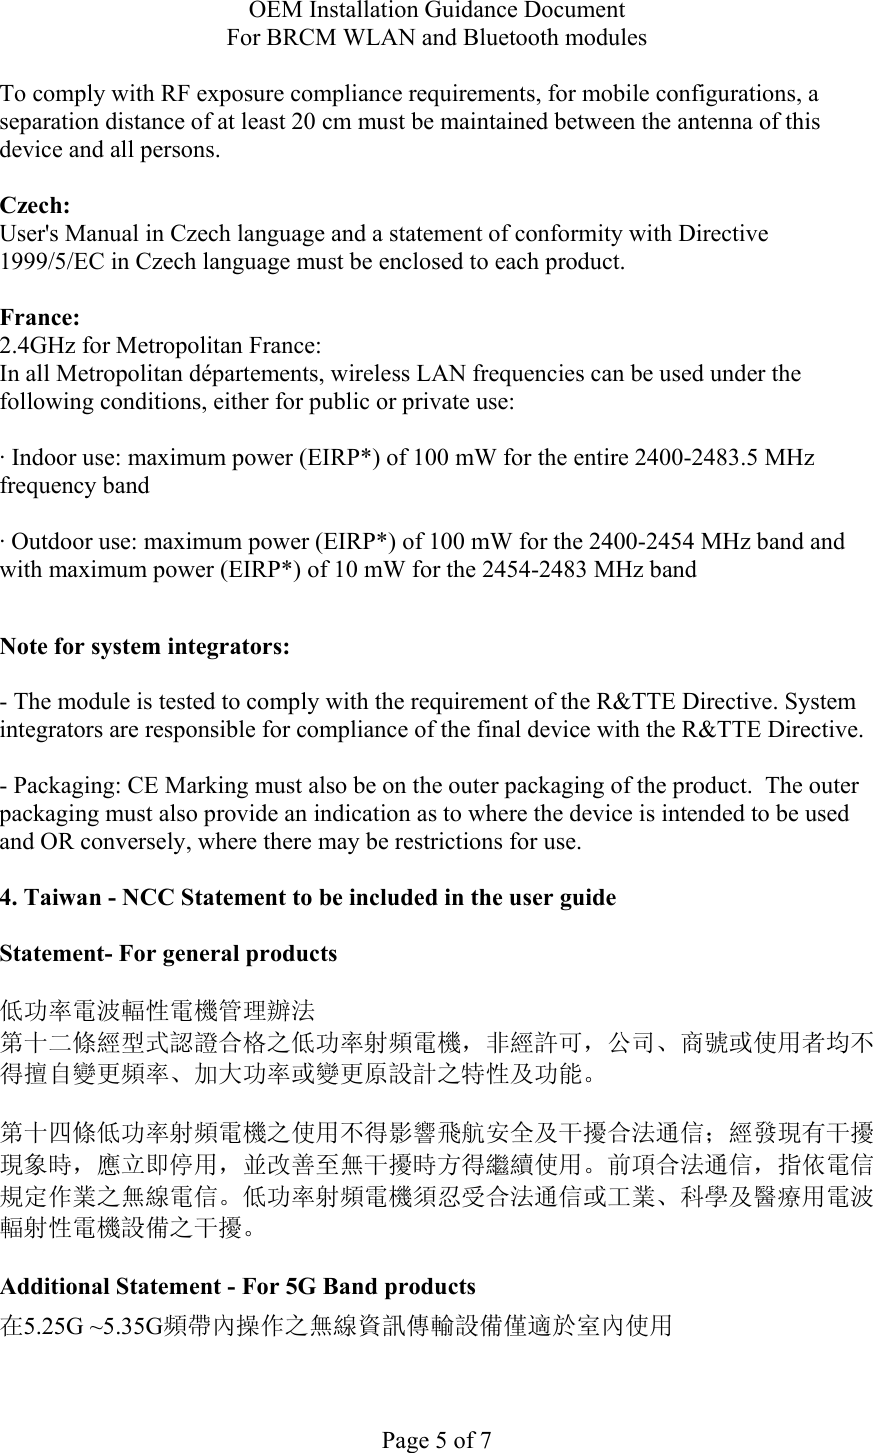 OEM Installation Guidance Document For BRCM WLAN and Bluetooth modules  Page 5 of 7 To comply with RF exposure compliance requirements, for mobile configurations, a separation distance of at least 20 cm must be maintained between the antenna of this device and all persons.  Czech:  User&apos;s Manual in Czech language and a statement of conformity with Directive 1999/5/EC in Czech language must be enclosed to each product.   France: 2.4GHz for Metropolitan France:   In all Metropolitan départements, wireless LAN frequencies can be used under the following conditions, either for public or private use:  · Indoor use: maximum power (EIRP*) of 100 mW for the entire 2400-2483.5 MHz frequency band · Outdoor use: maximum power (EIRP*) of 100 mW for the 2400-2454 MHz band and with maximum power (EIRP*) of 10 mW for the 2454-2483 MHz band  Note for system integrators:   - The module is tested to comply with the requirement of the R&amp;TTE Directive. System integrators are responsible for compliance of the final device with the R&amp;TTE Directive.   - Packaging: CE Marking must also be on the outer packaging of the product.  The outer packaging must also provide an indication as to where the device is intended to be used and OR conversely, where there may be restrictions for use.   4. Taiwan - NCC Statement to be included in the user guide  Statement- For general products  低功率電波輻性電機管理辦法 第十二條經型式認證合格之低功率射頻電機，非經許可，公司、商號或使用者均不得擅自變更頻率、加大功率或變更原設計之特性及功能。  第十四條低功率射頻電機之使用不得影響飛航安全及干擾合法通信；經發現有干擾現象時，應立即停用，並改善至無干擾時方得繼續使用。前項合法通信，指依電信規定作業之無線電信。低功率射頻電機須忍受合法通信或工業、科學及醫療用電波輻射性電機設備之干擾。  Additional Statement - For 5G Band products 在5.25G ~5.35G頻帶內操作之無線資訊傳輸設備僅適於室內使用  